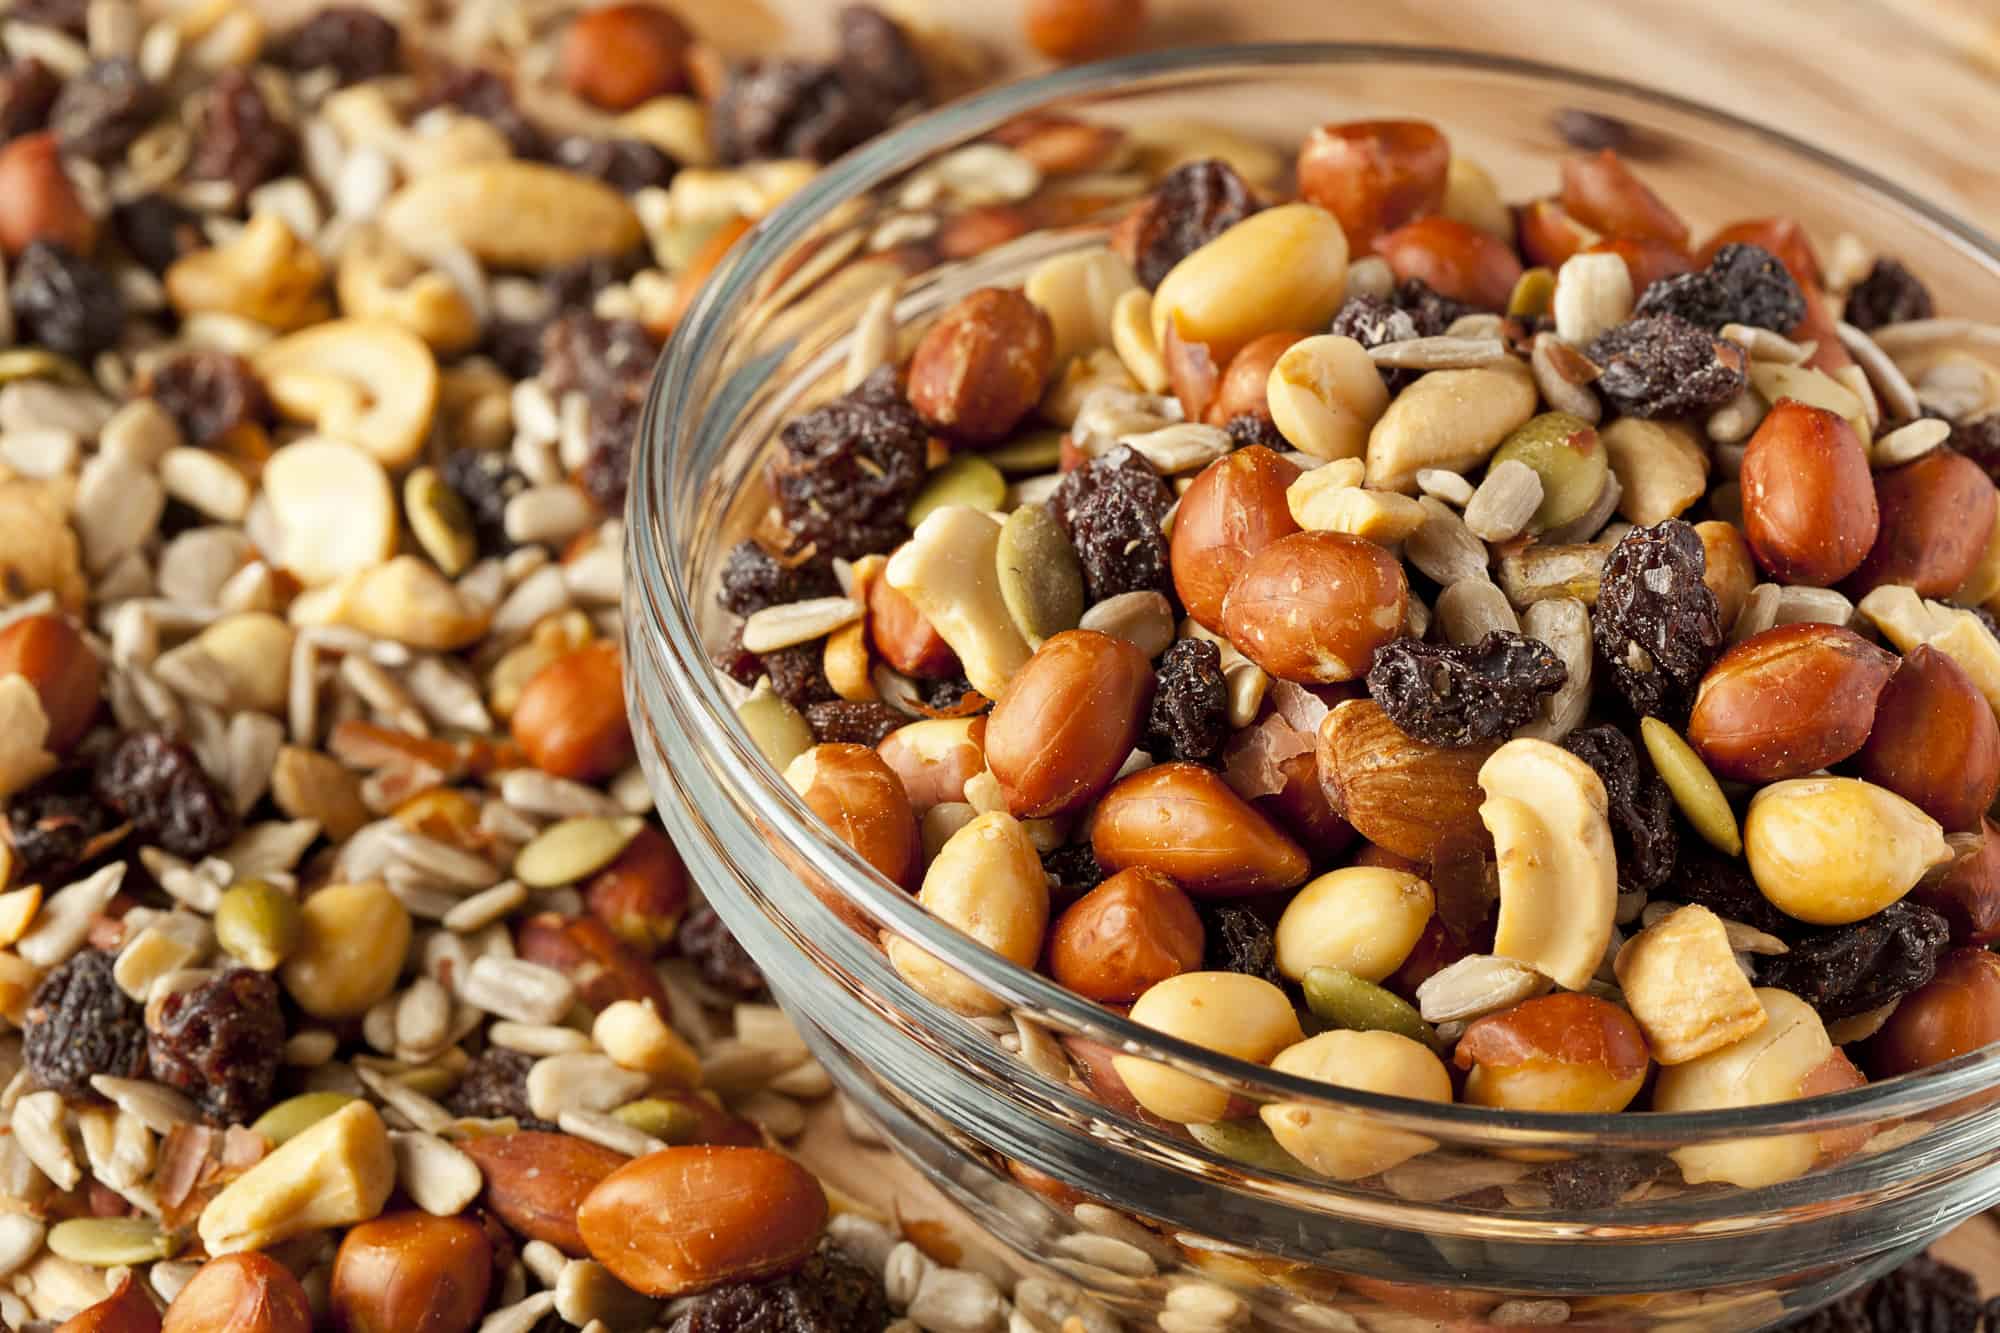 Make your own trail mix for a quick and healthy on-the-go snack!